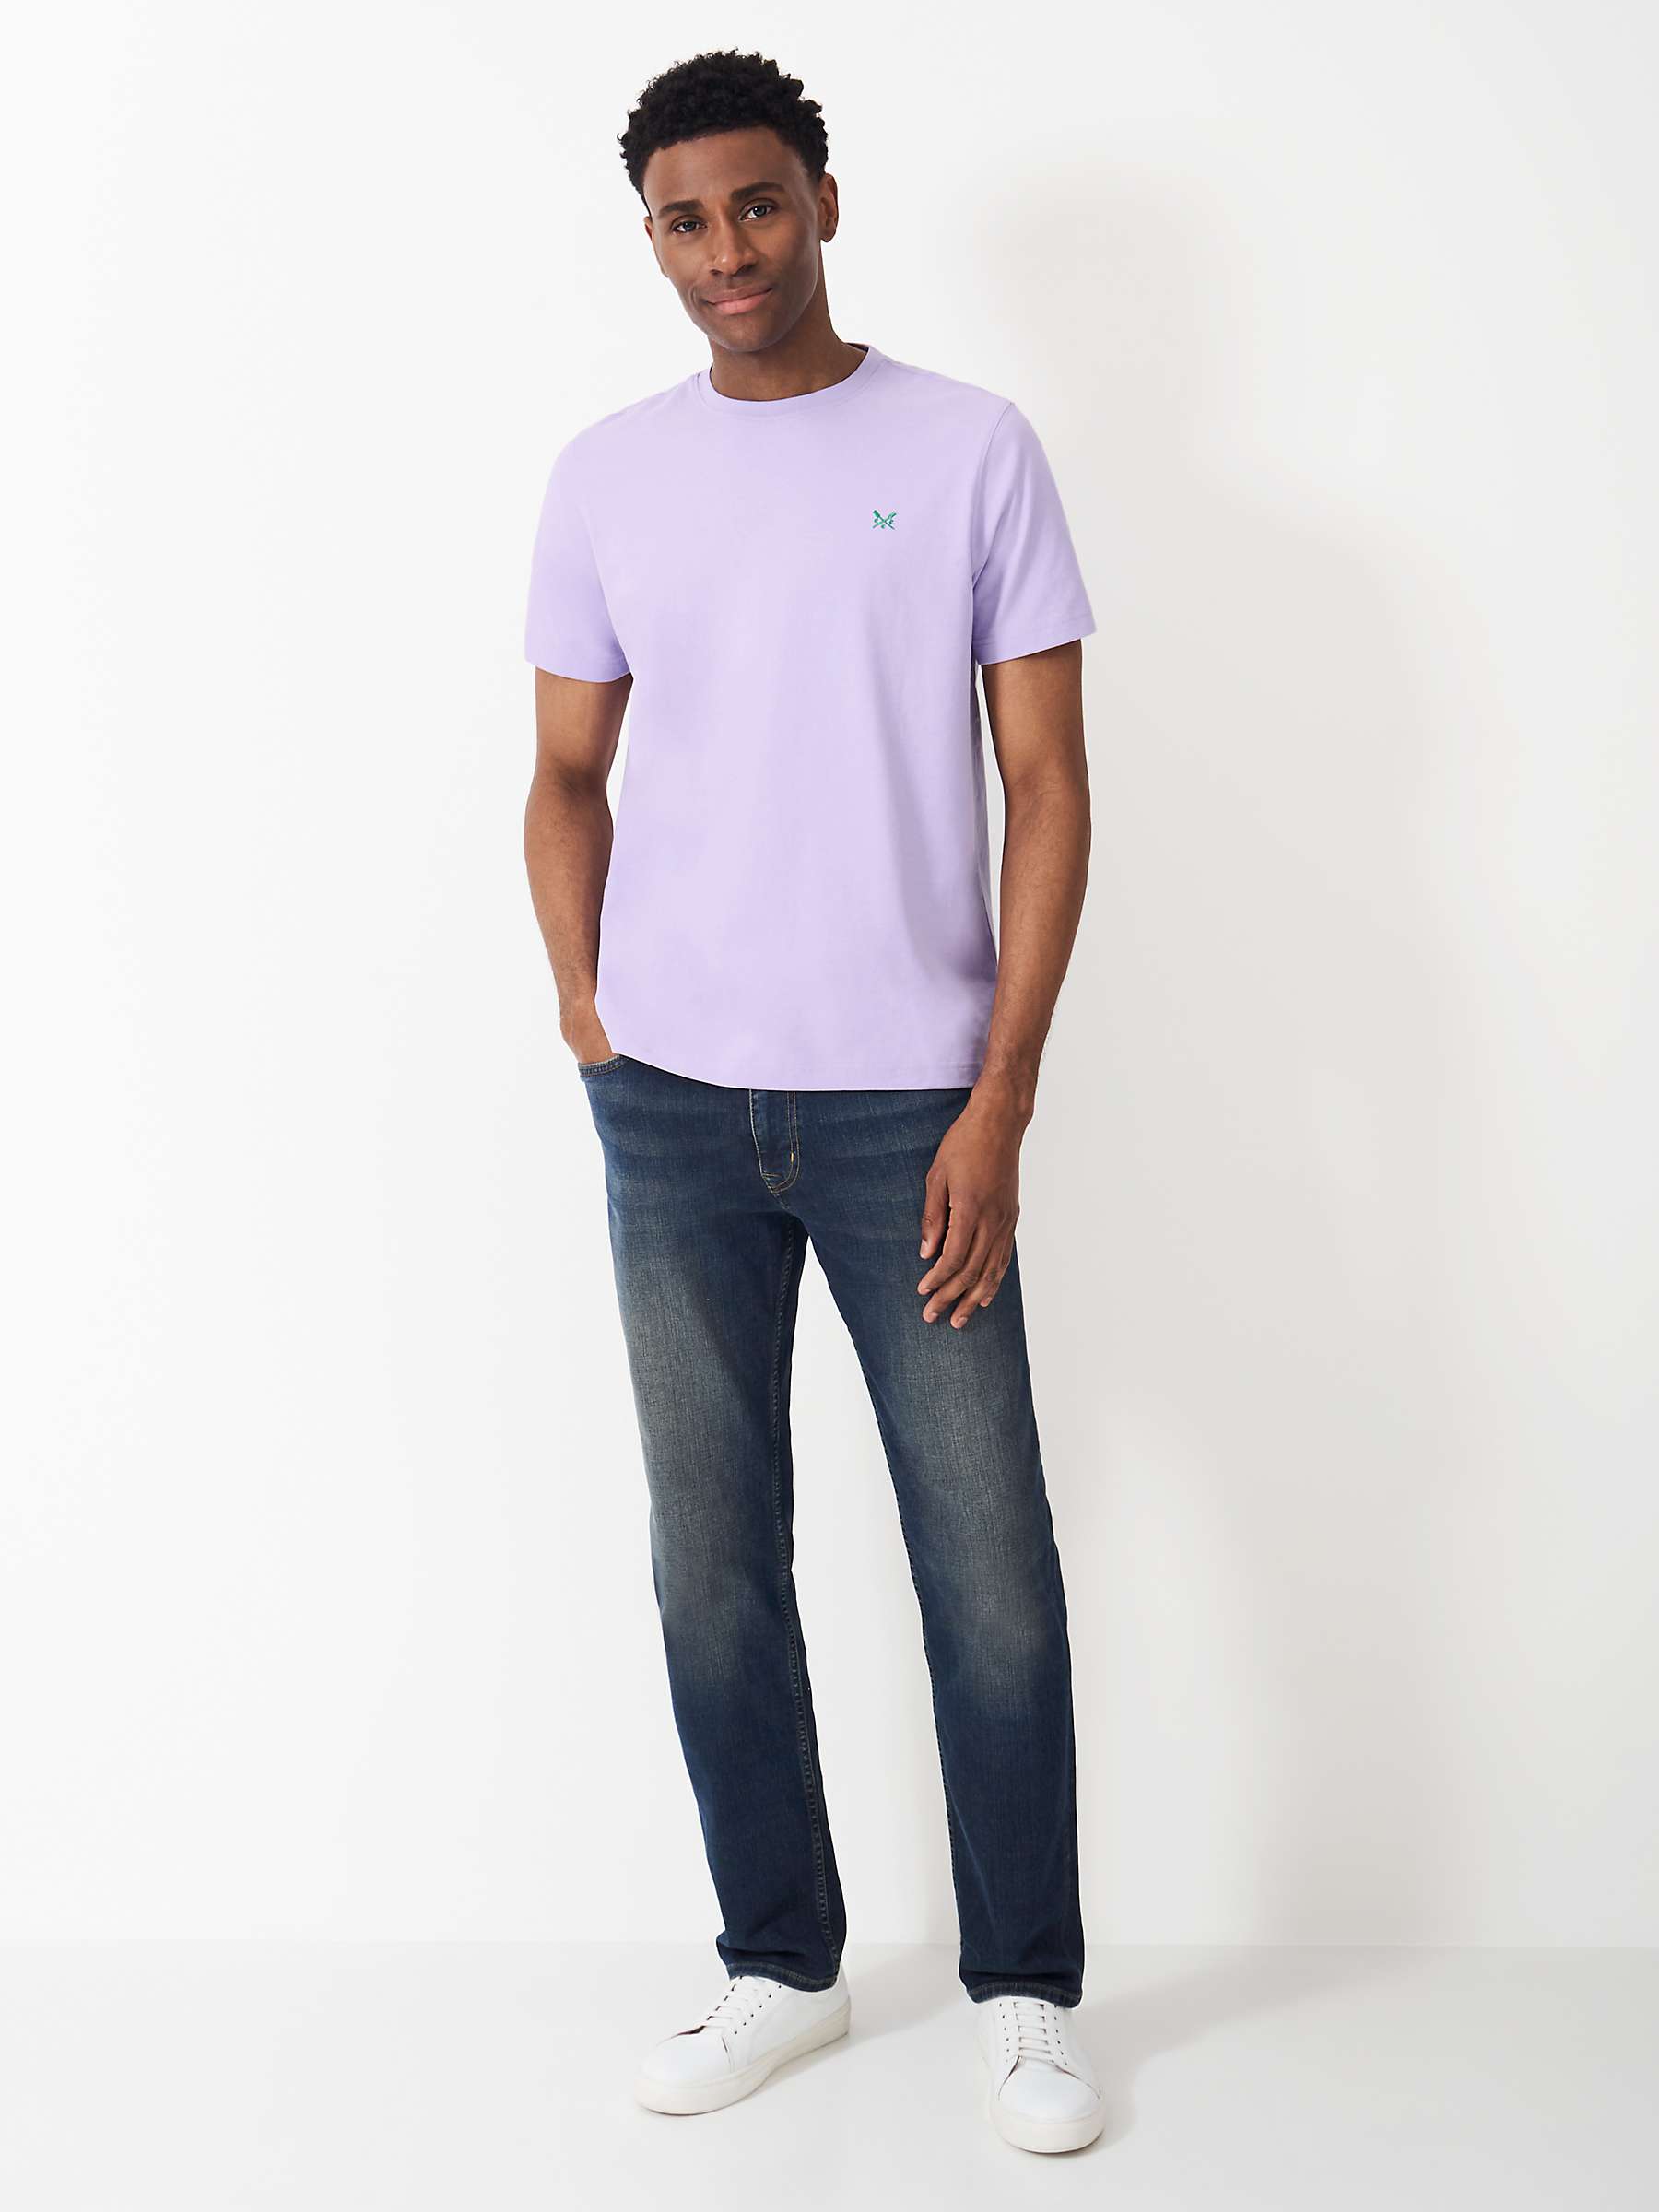 Buy Crew Clothing Crew Neck T-Shirt, Lilac Online at johnlewis.com